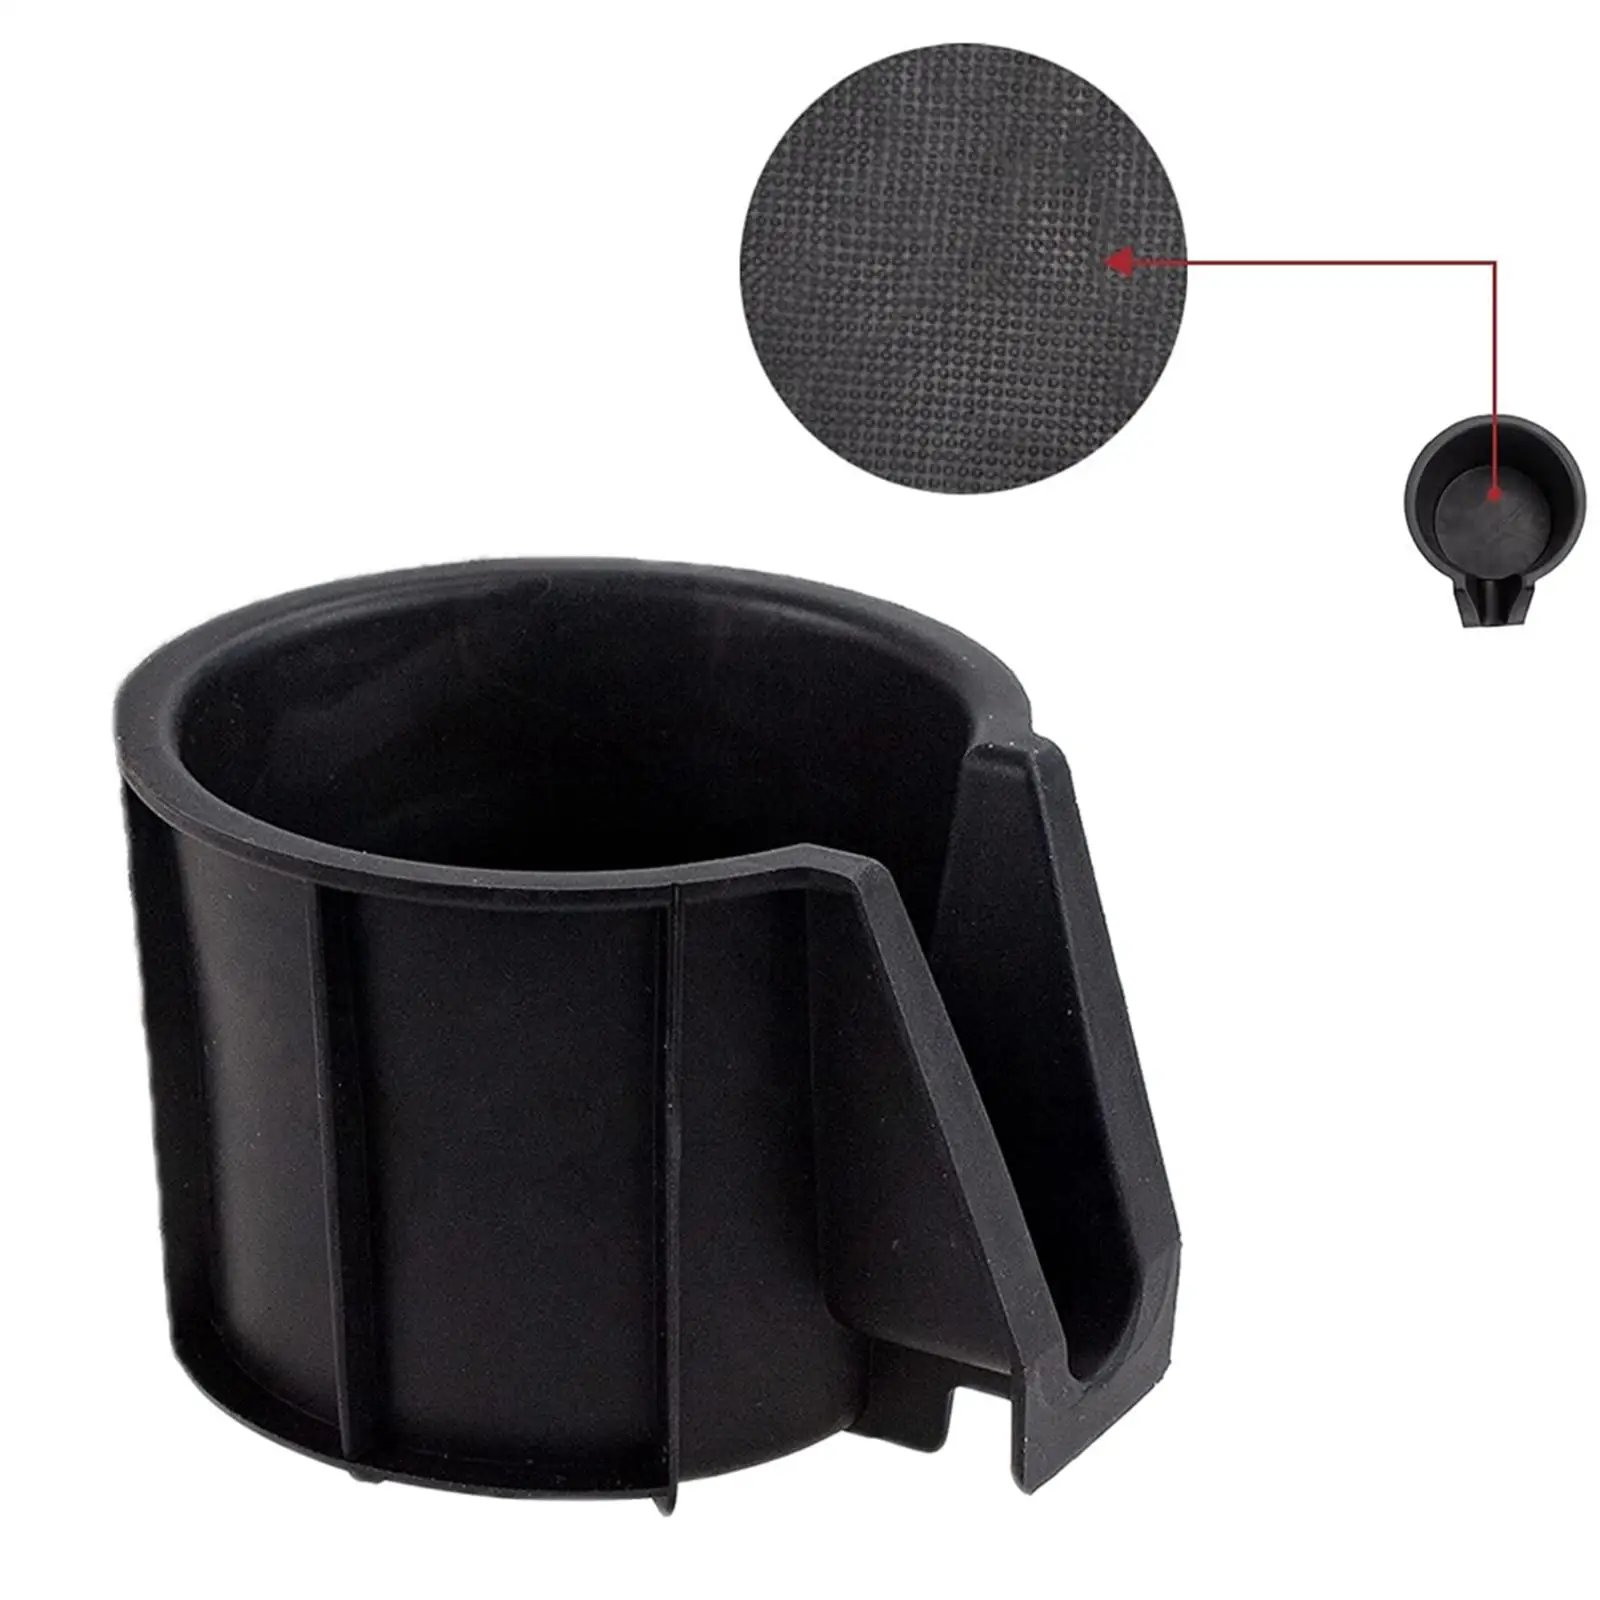 Console Cup Holder Insert Accessories Durable Spare Parts Replaces Cup Holder sub Assembly for   2014-2021